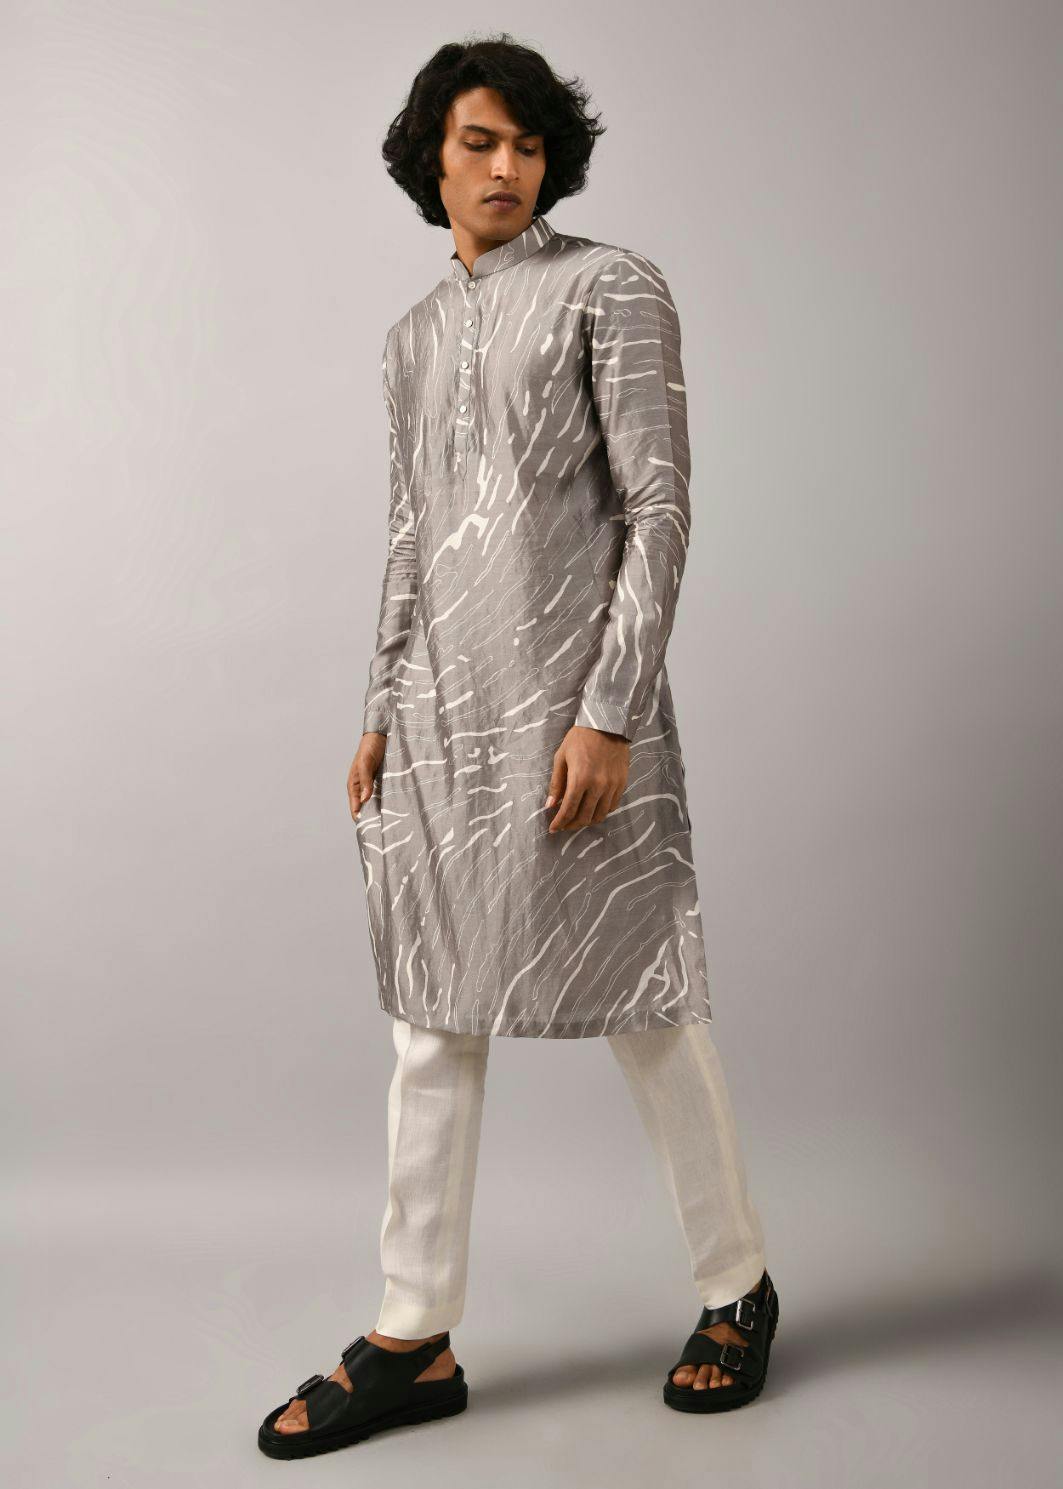 Grey Terrain Maize Kurta, a product by Country Made